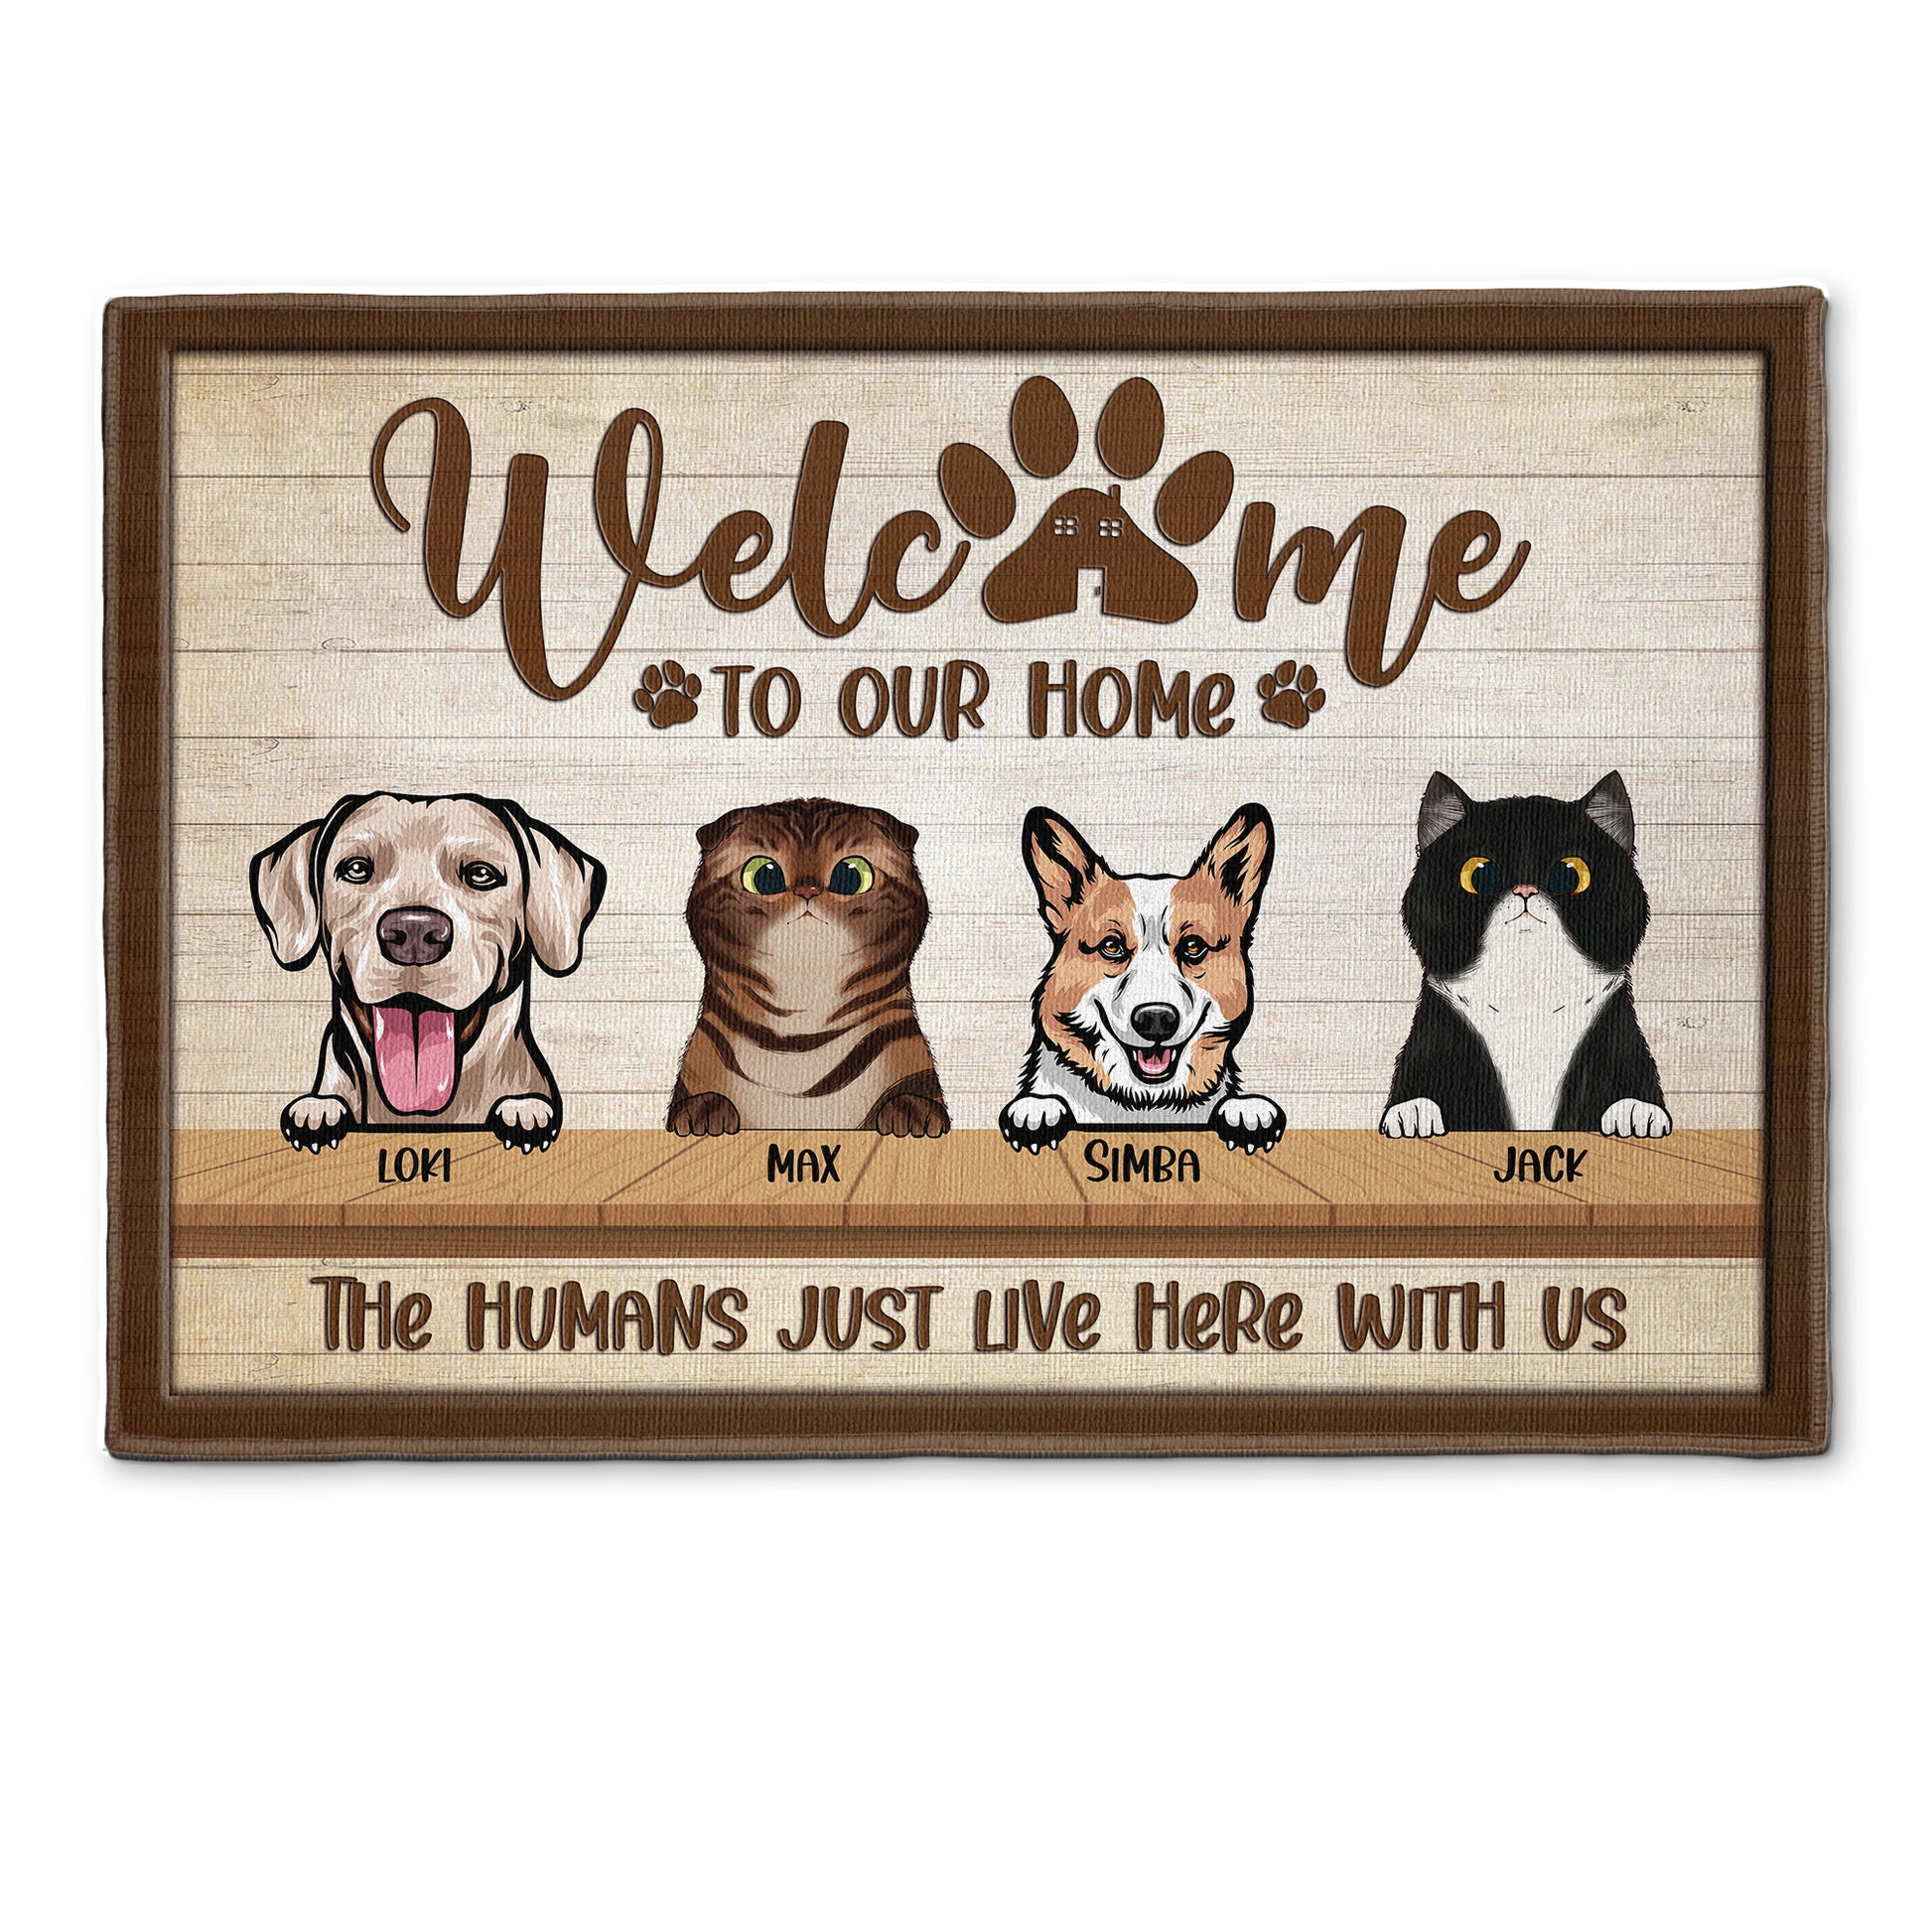 Personalized DoorMat - Dogs and Cats - Welcome to our home.Custom Welcome  Mats, Cat Lover, Dog Lover